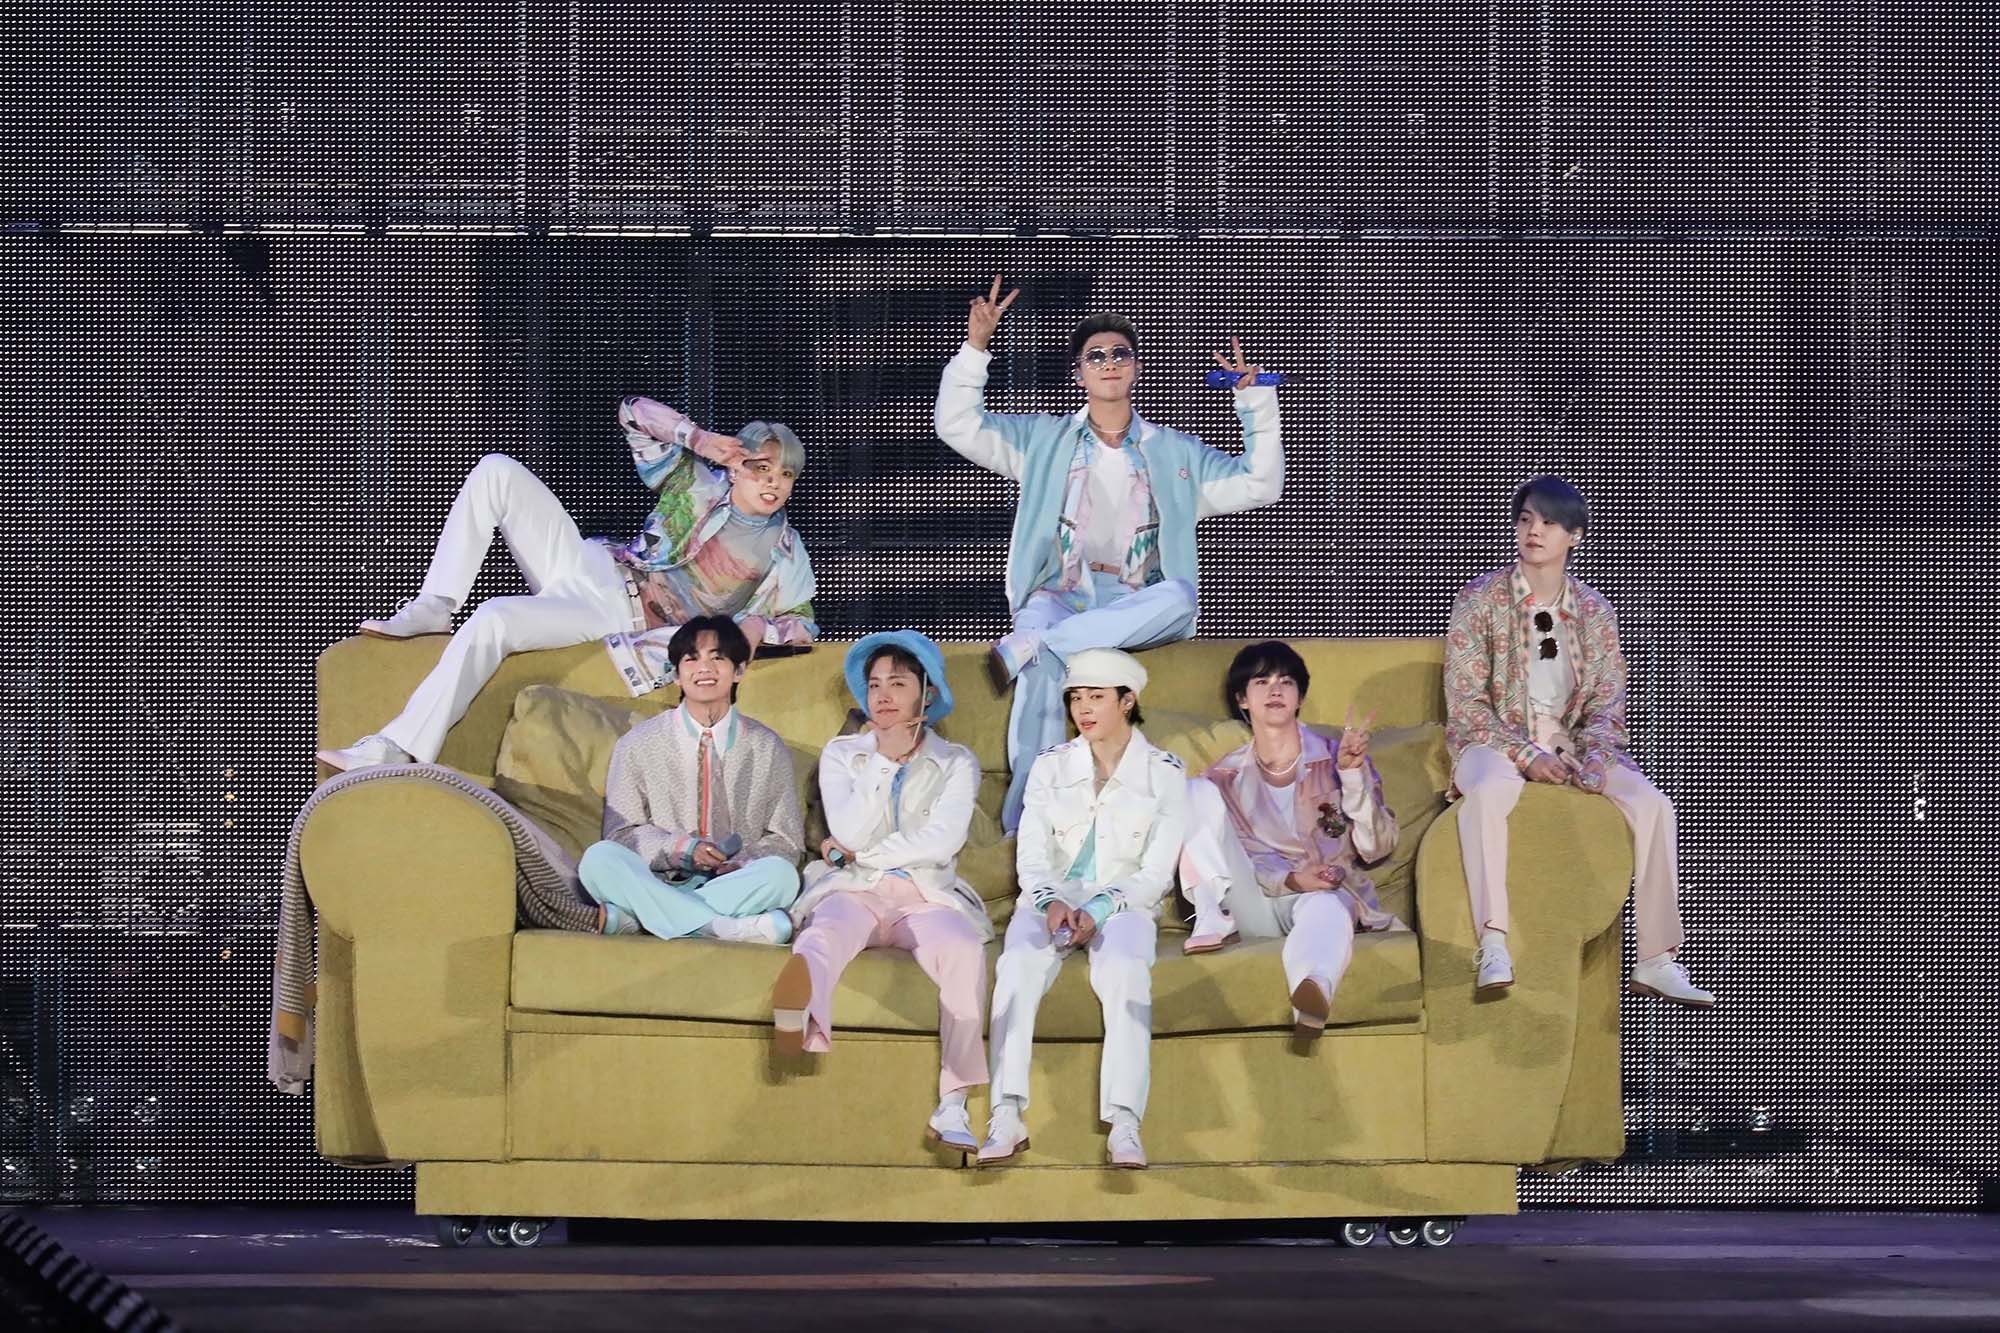 The members of BTS sit on a couch during 'Permission to Dance On Stage'